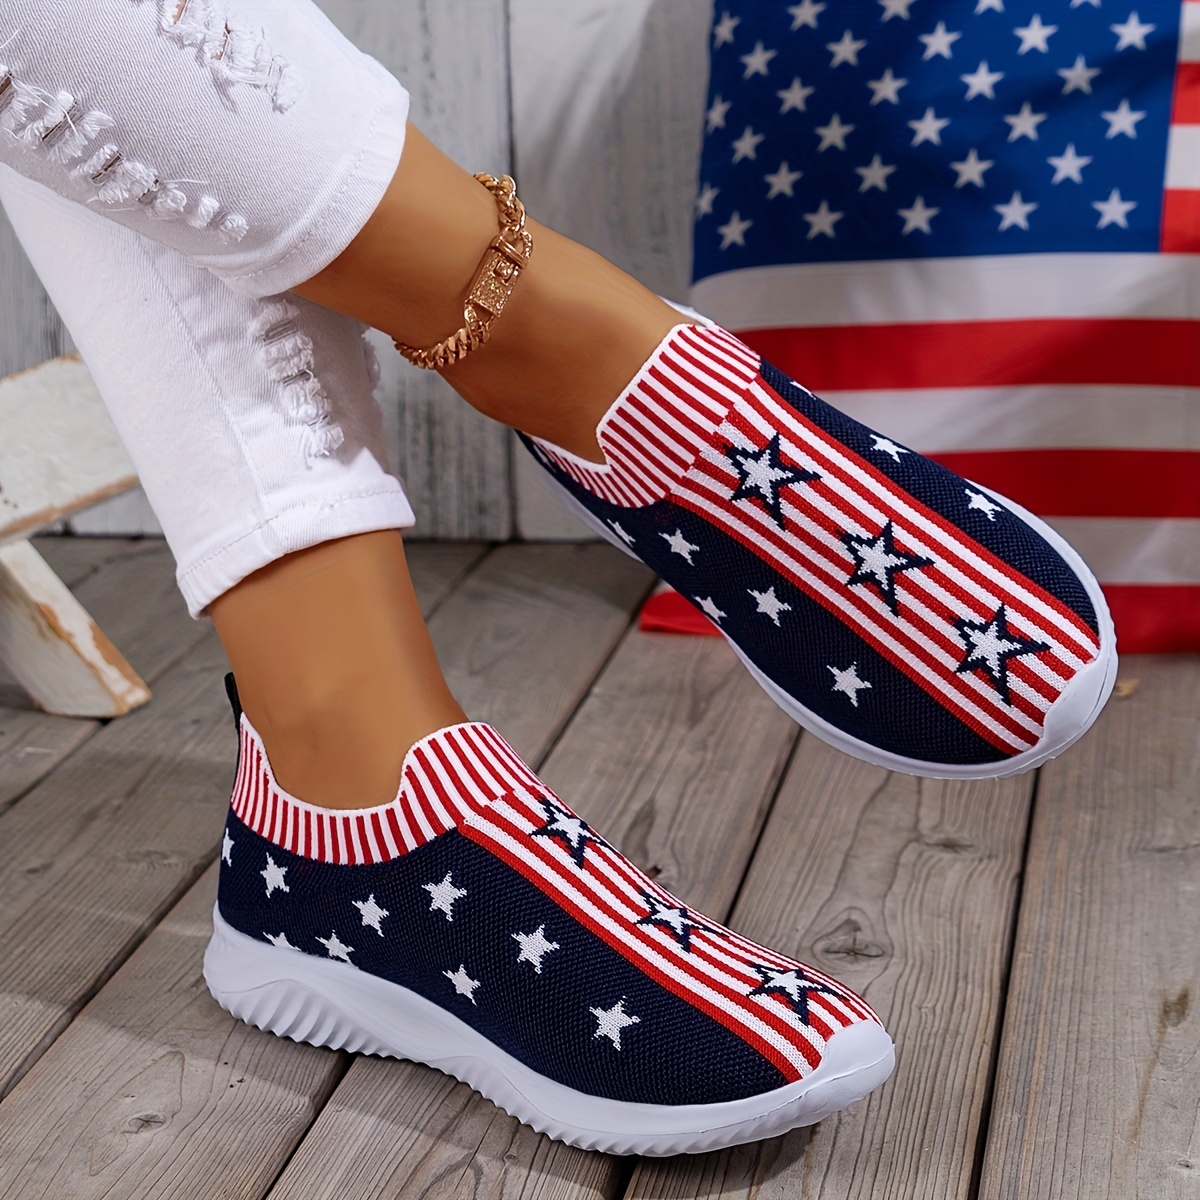 

Women's Star & Stripe Pattern Slip-on Fashion Walking Shoes, Independence Day Flying Woven Casual Sneakers, Soft Sole Patriotic Lightweight Running Shoes